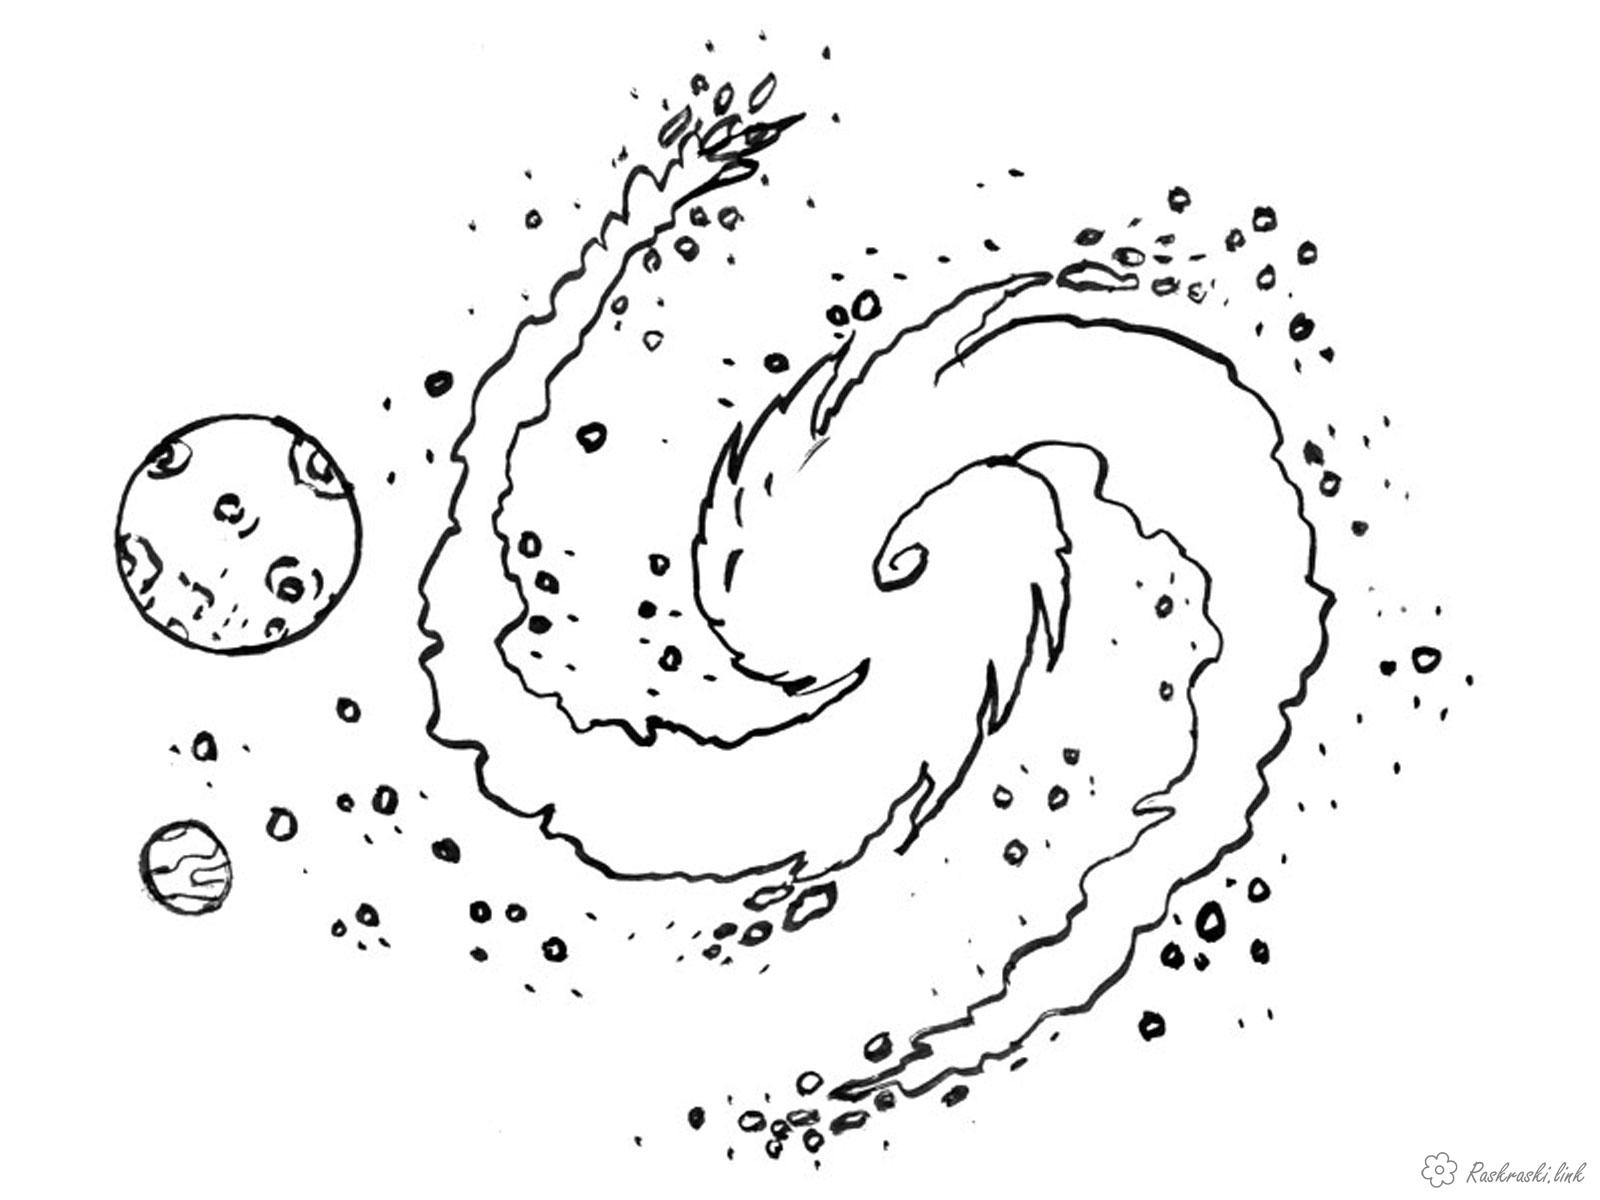 Milky Way Coloring Page at GetColorings.com | Free printable colorings